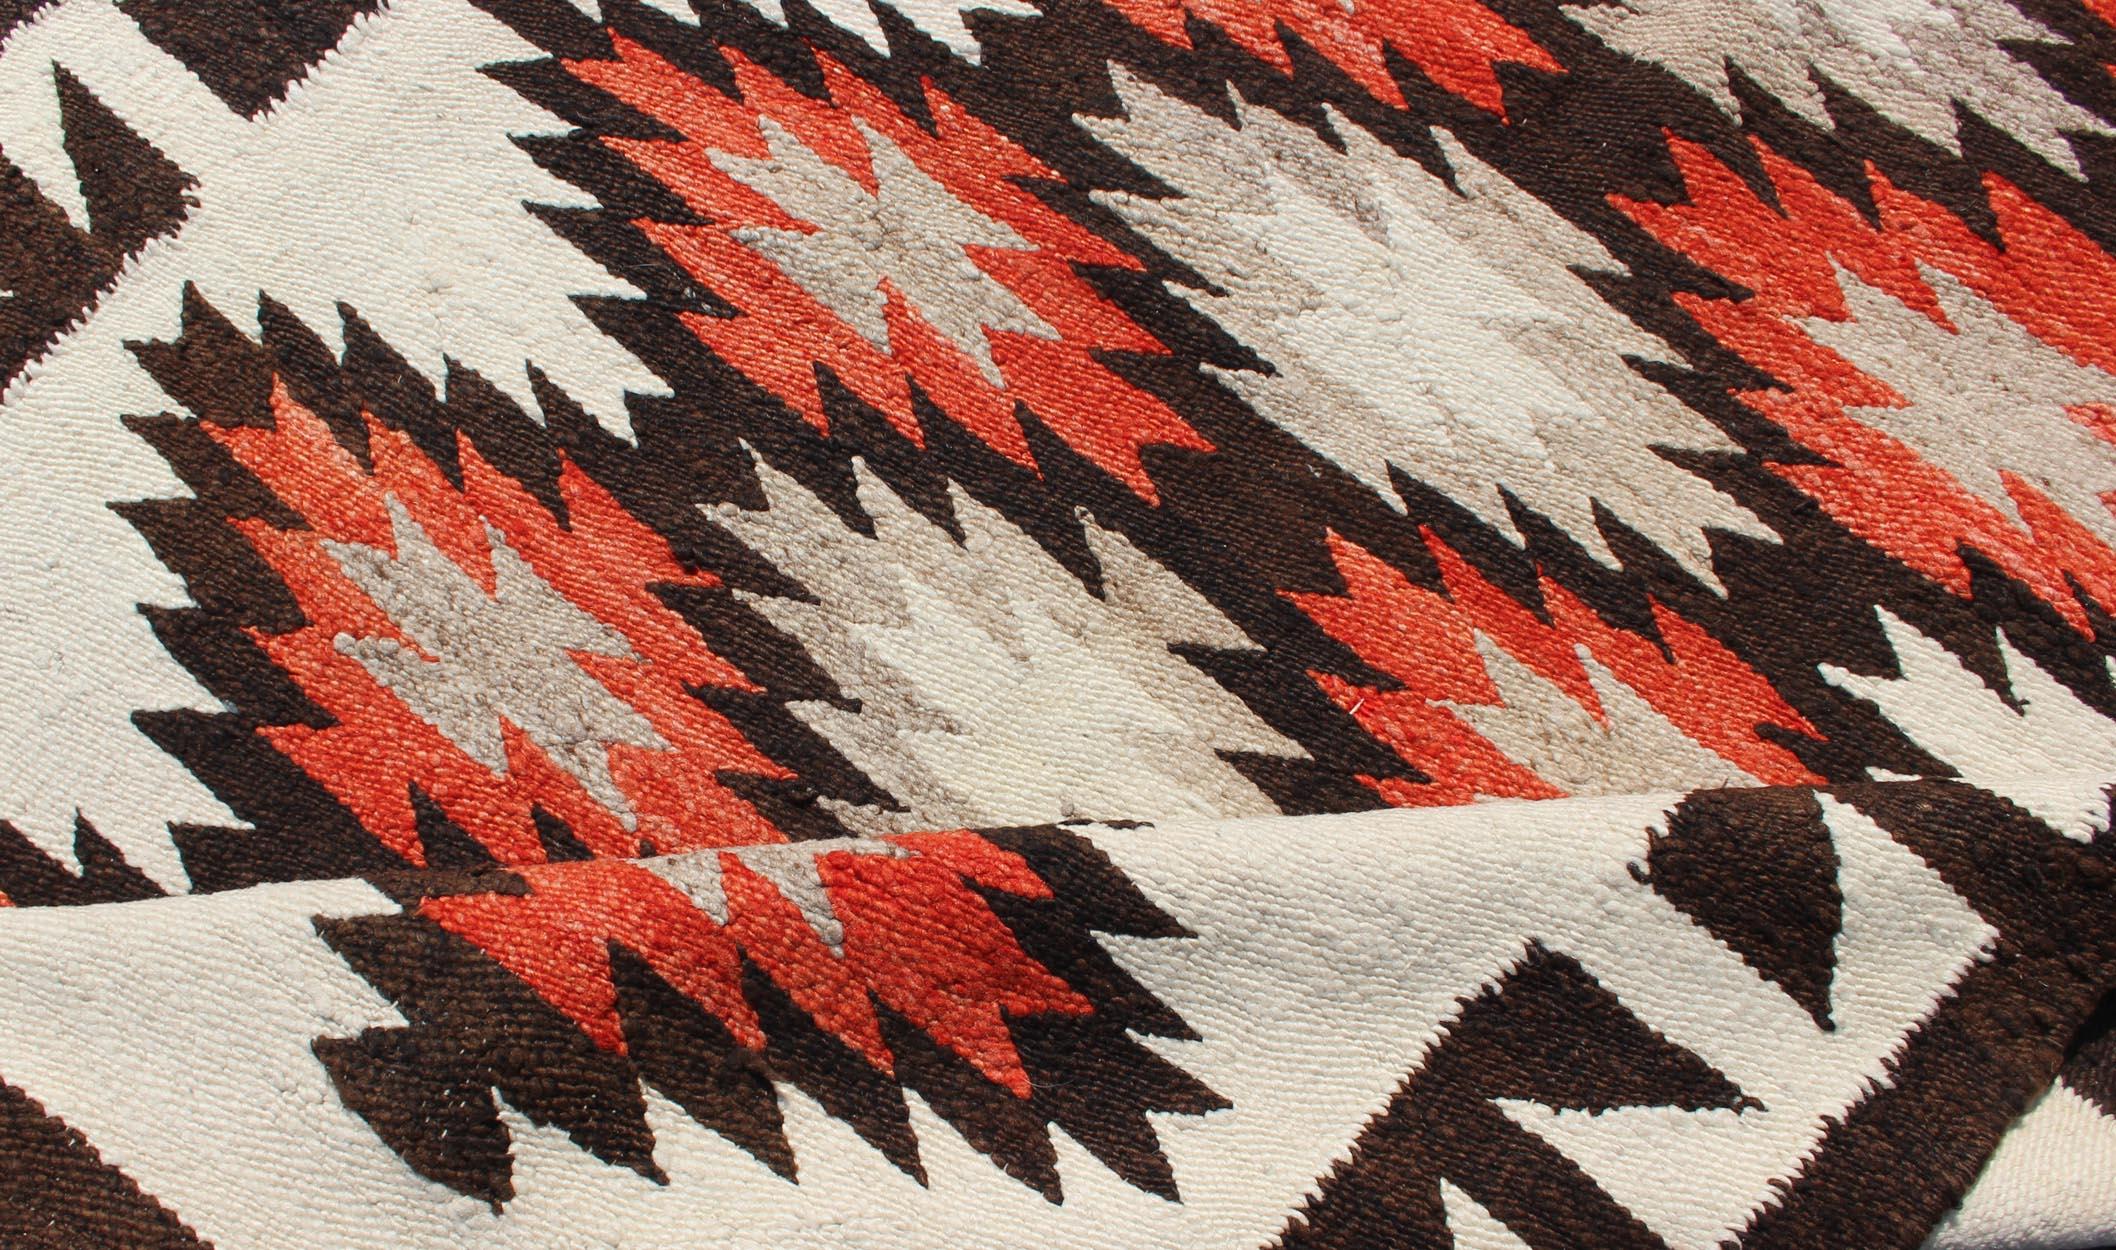 Mid-20th Century Vintage American Navajo Tribal Rug with Diamonds in Brown, Orange and Ivory For Sale